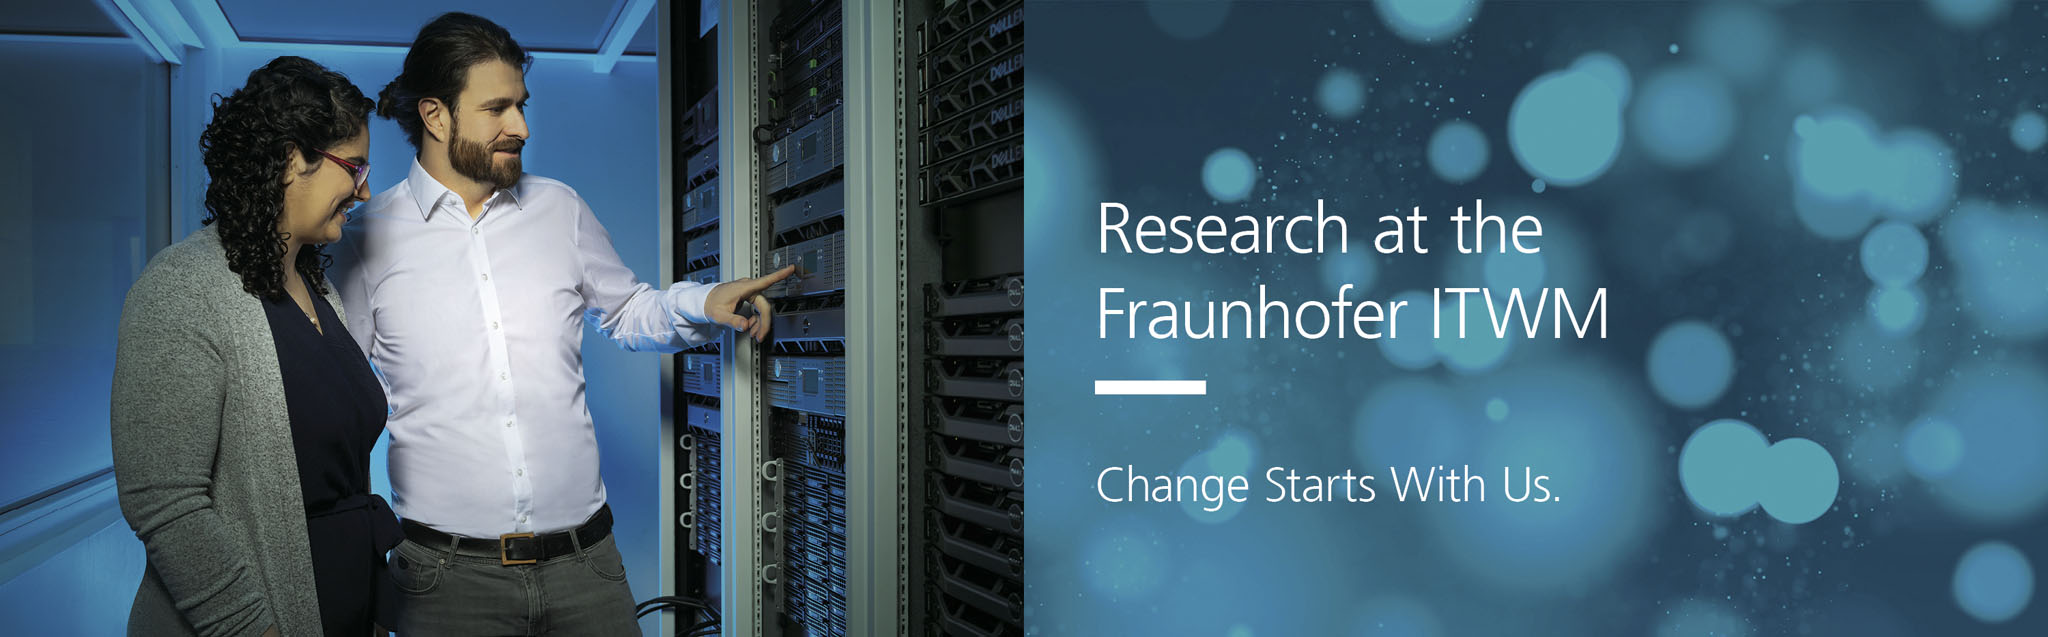 Research at the Fraunhofer ITWM